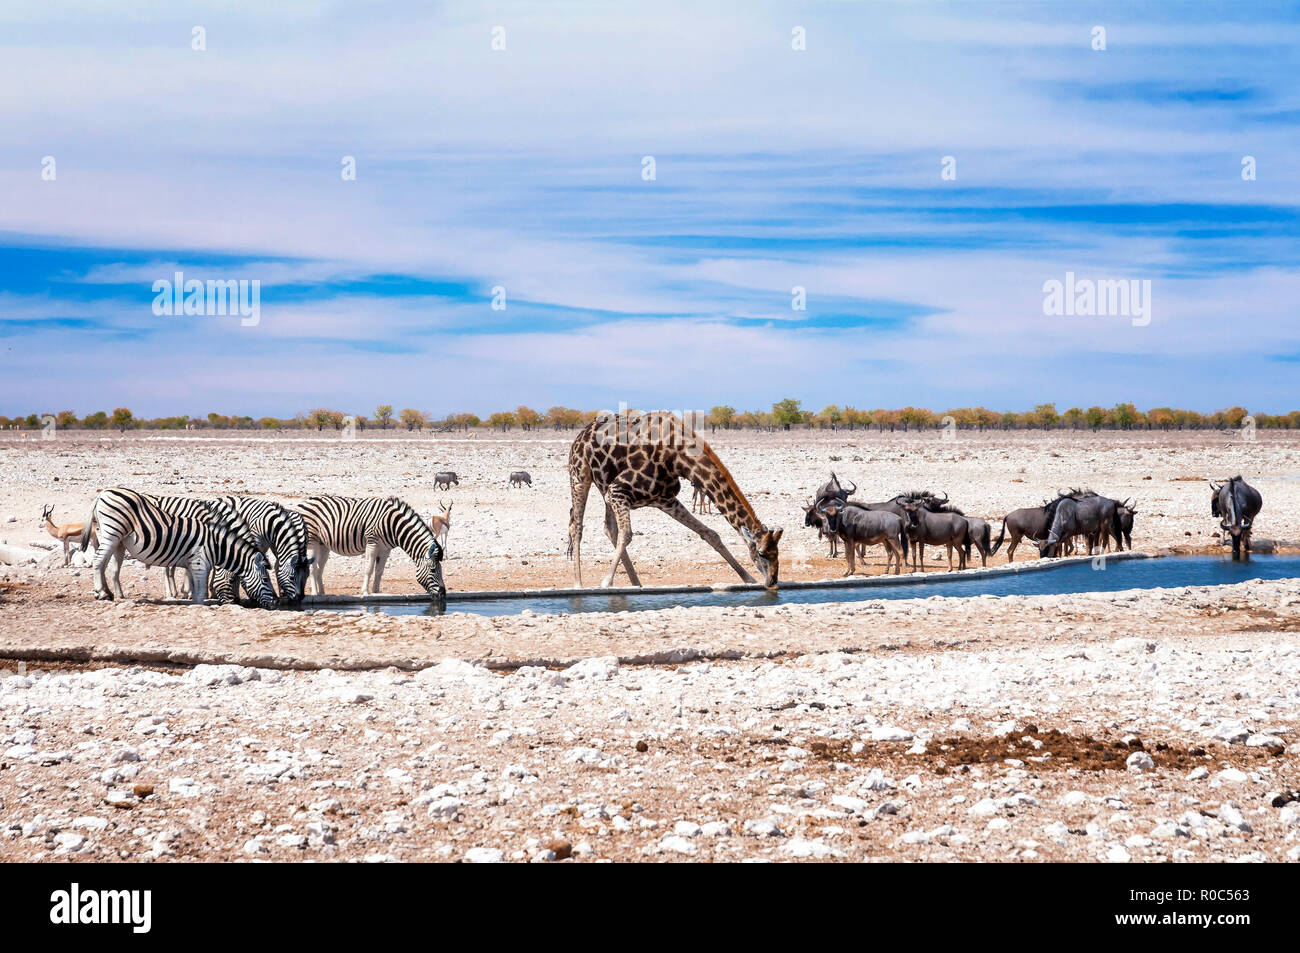 Etosha National Park is a national park in northwestern Namibia. The park was proclaimed a game reserve on March 22, 1907. Stock Photo